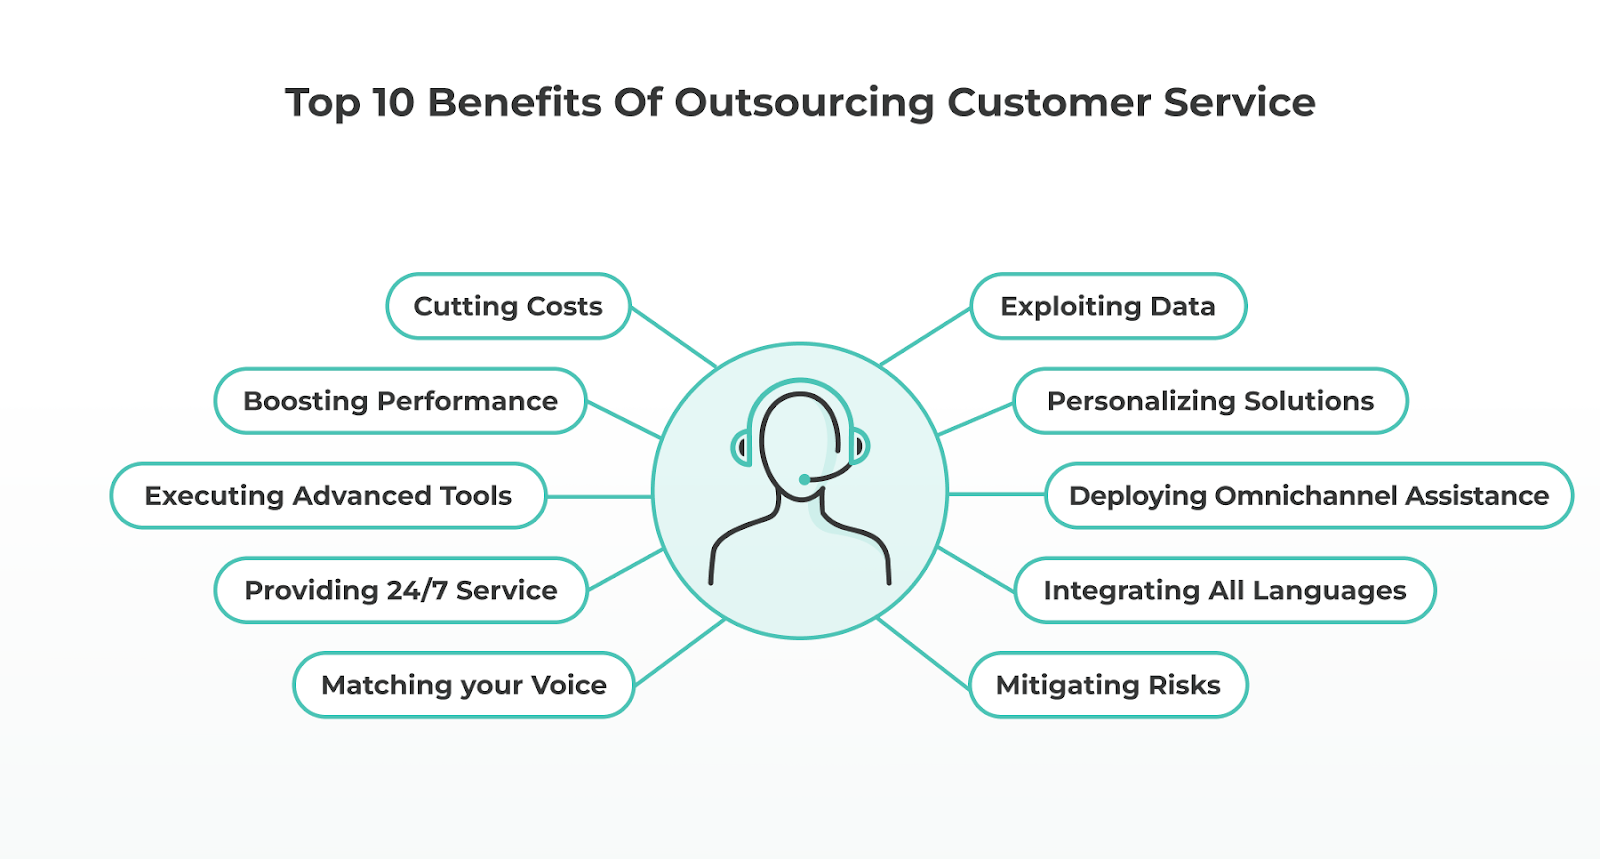 Top 10 Benefits of Outsourcing Customer Service